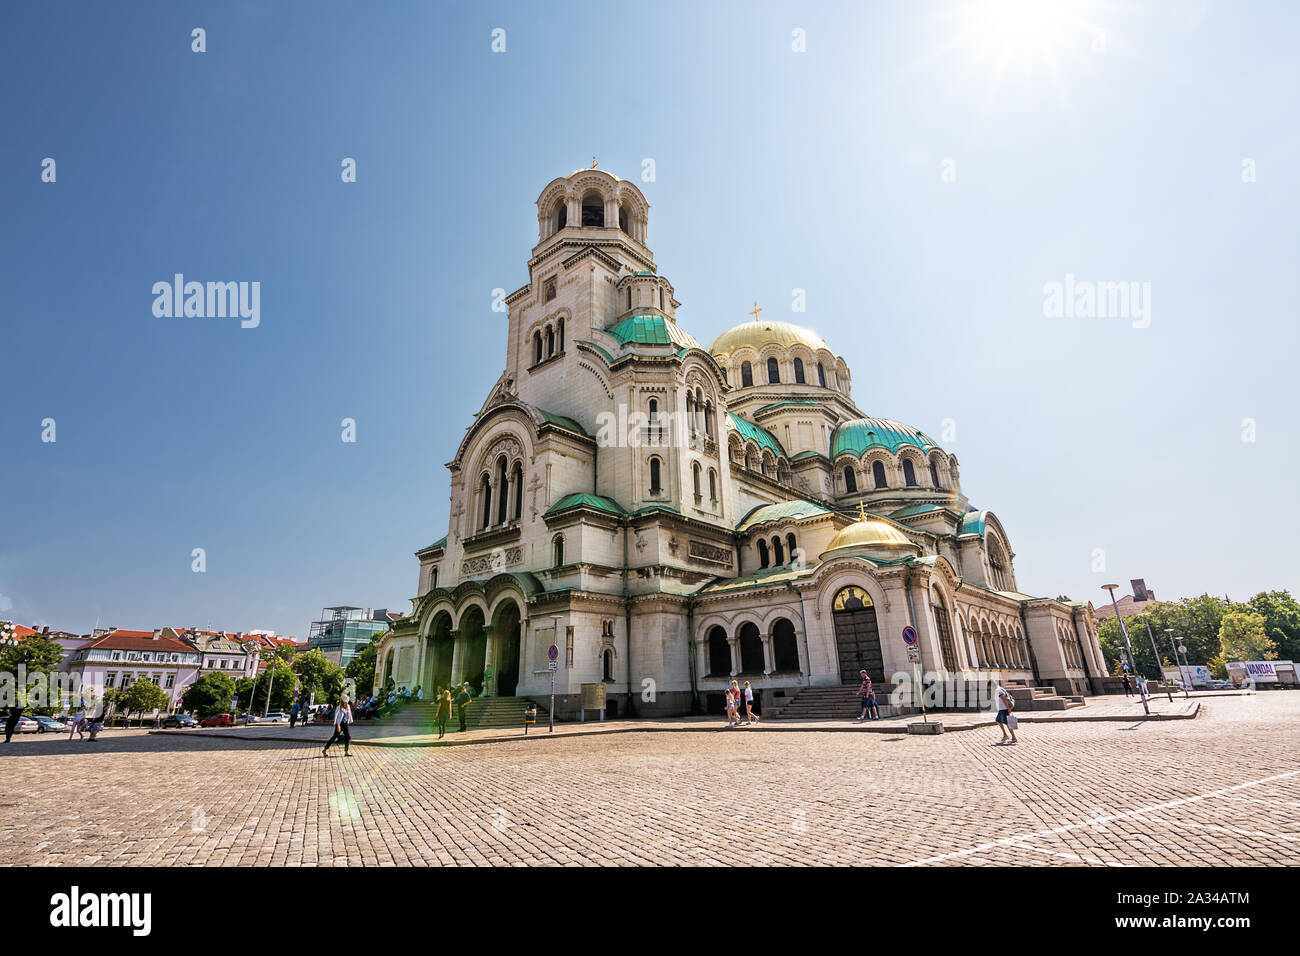 Sofia, Bulgaria - June 25, 2019: St. Alexander Nevski Cathedral with tourists and worshipers in the square in a sunny day Stock Photo